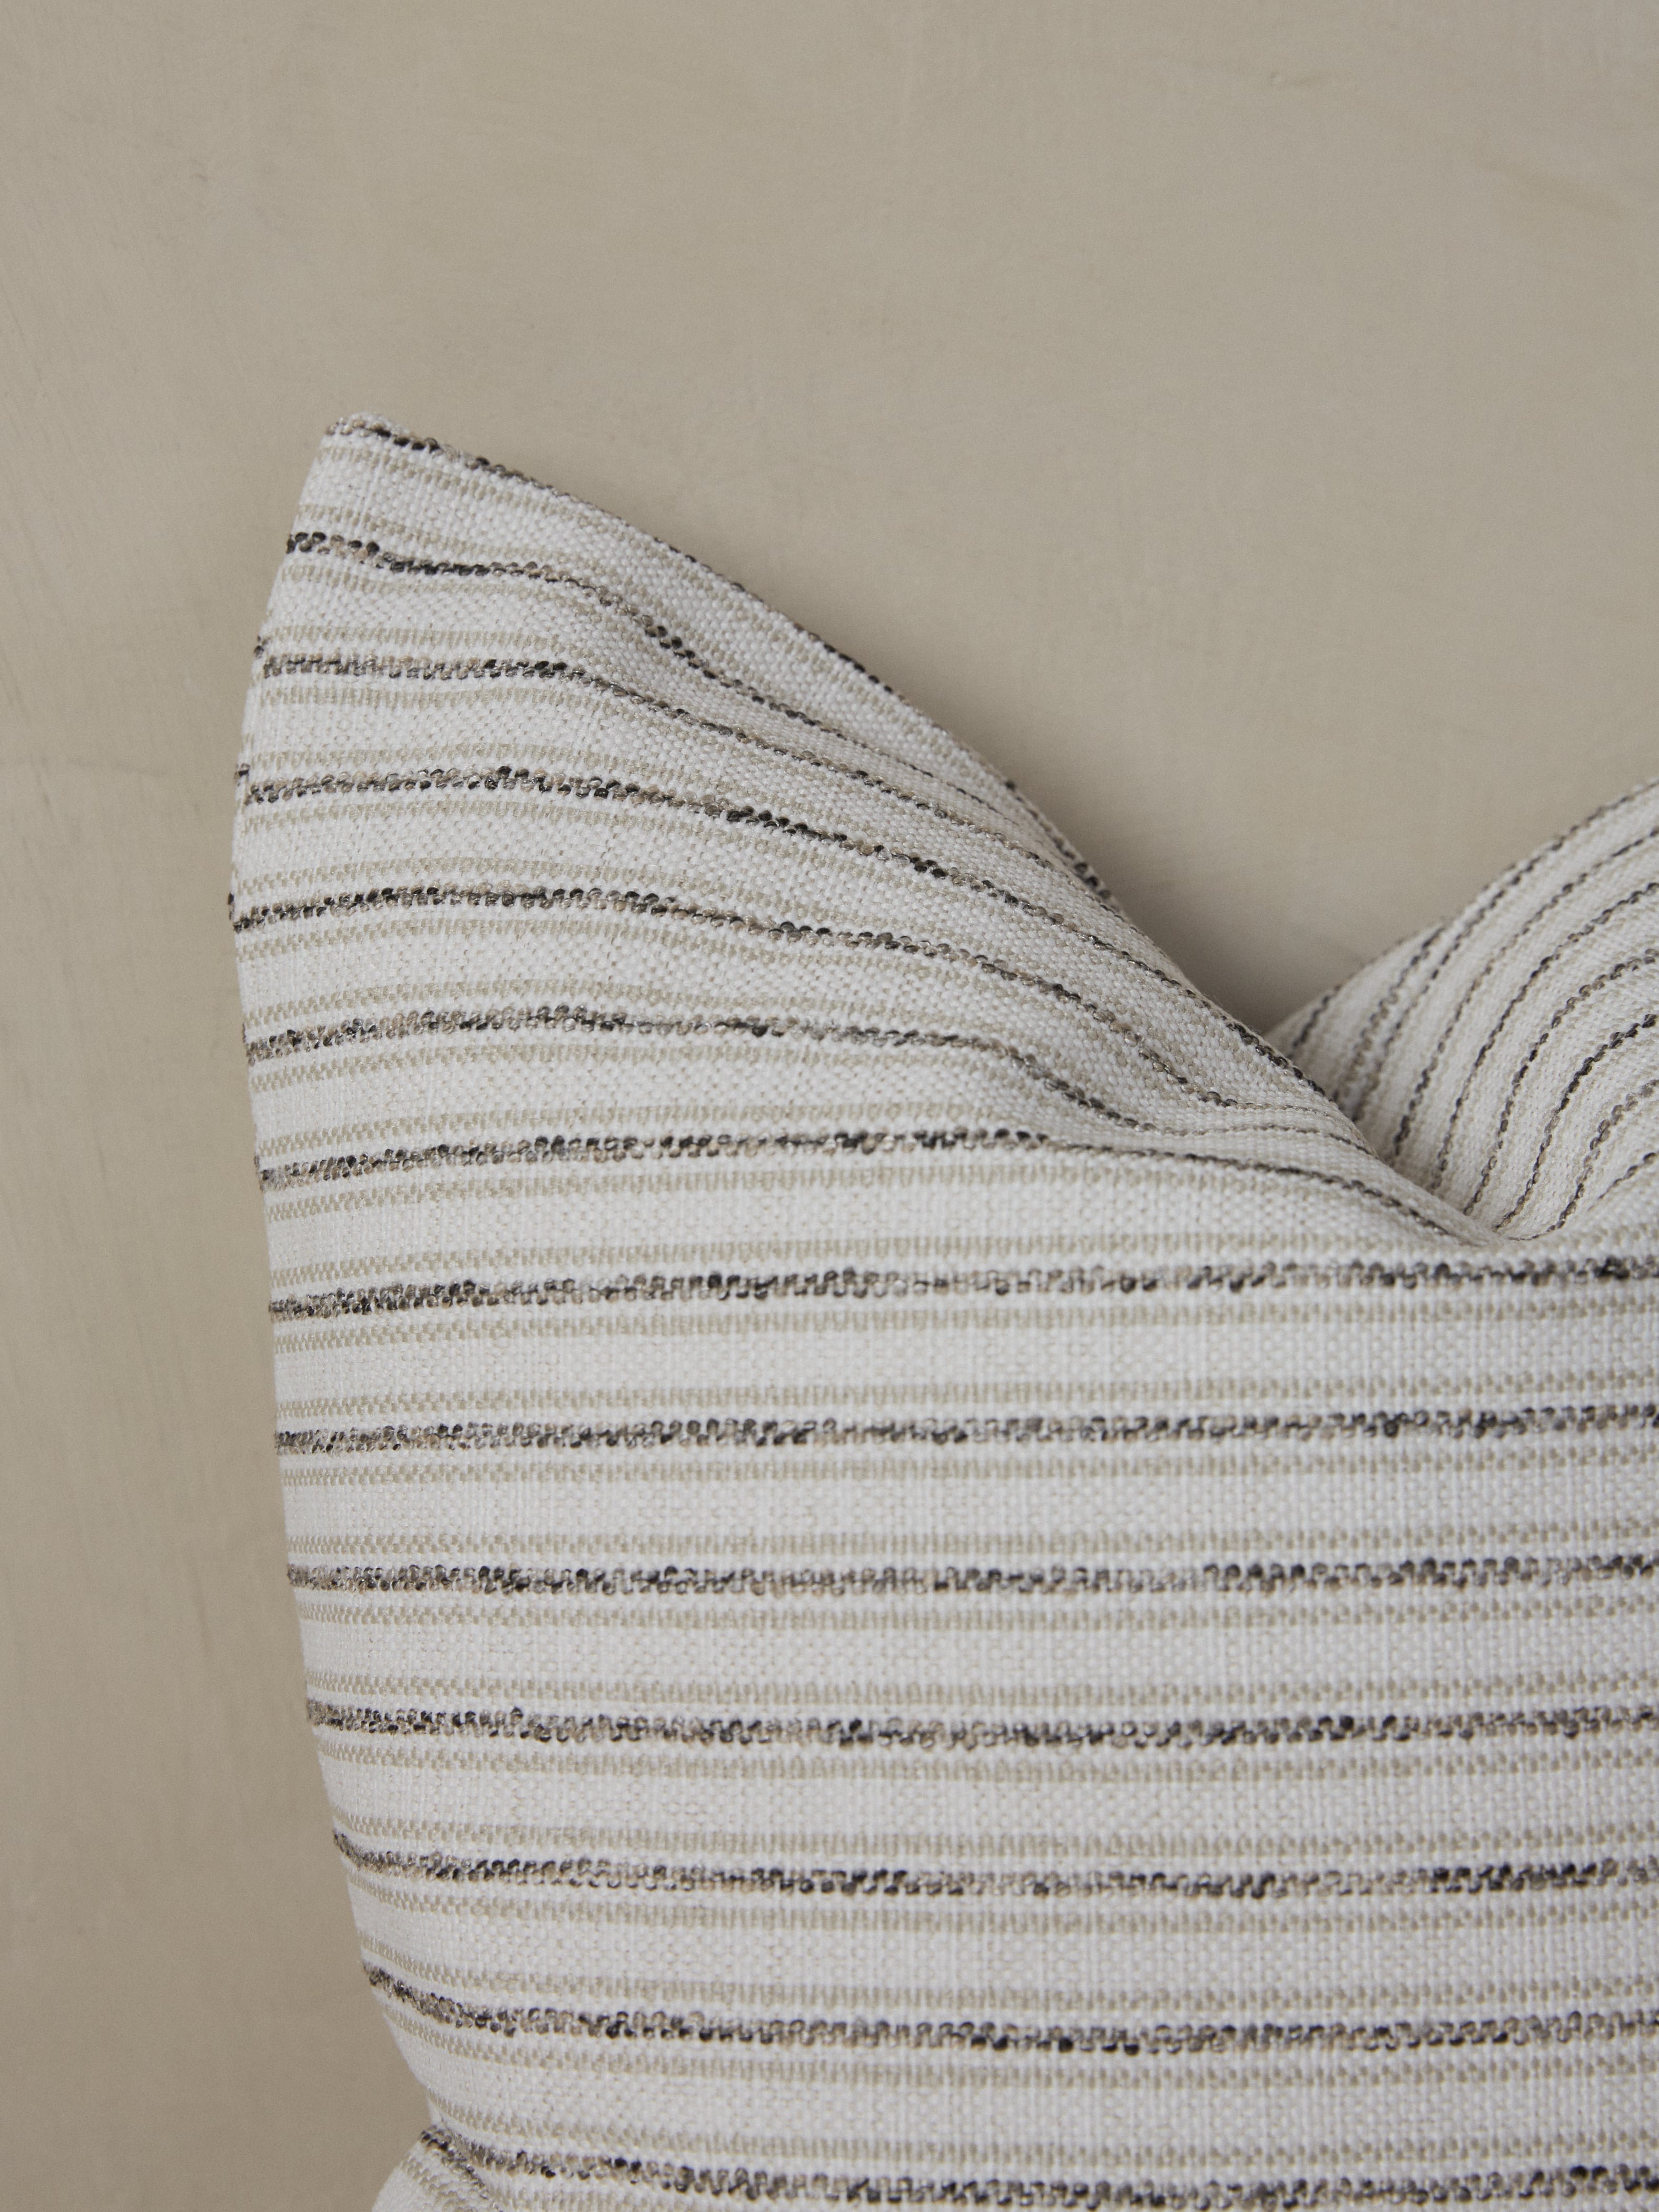 Black, white and neutral beige stripes on the Cambridge Pillow.